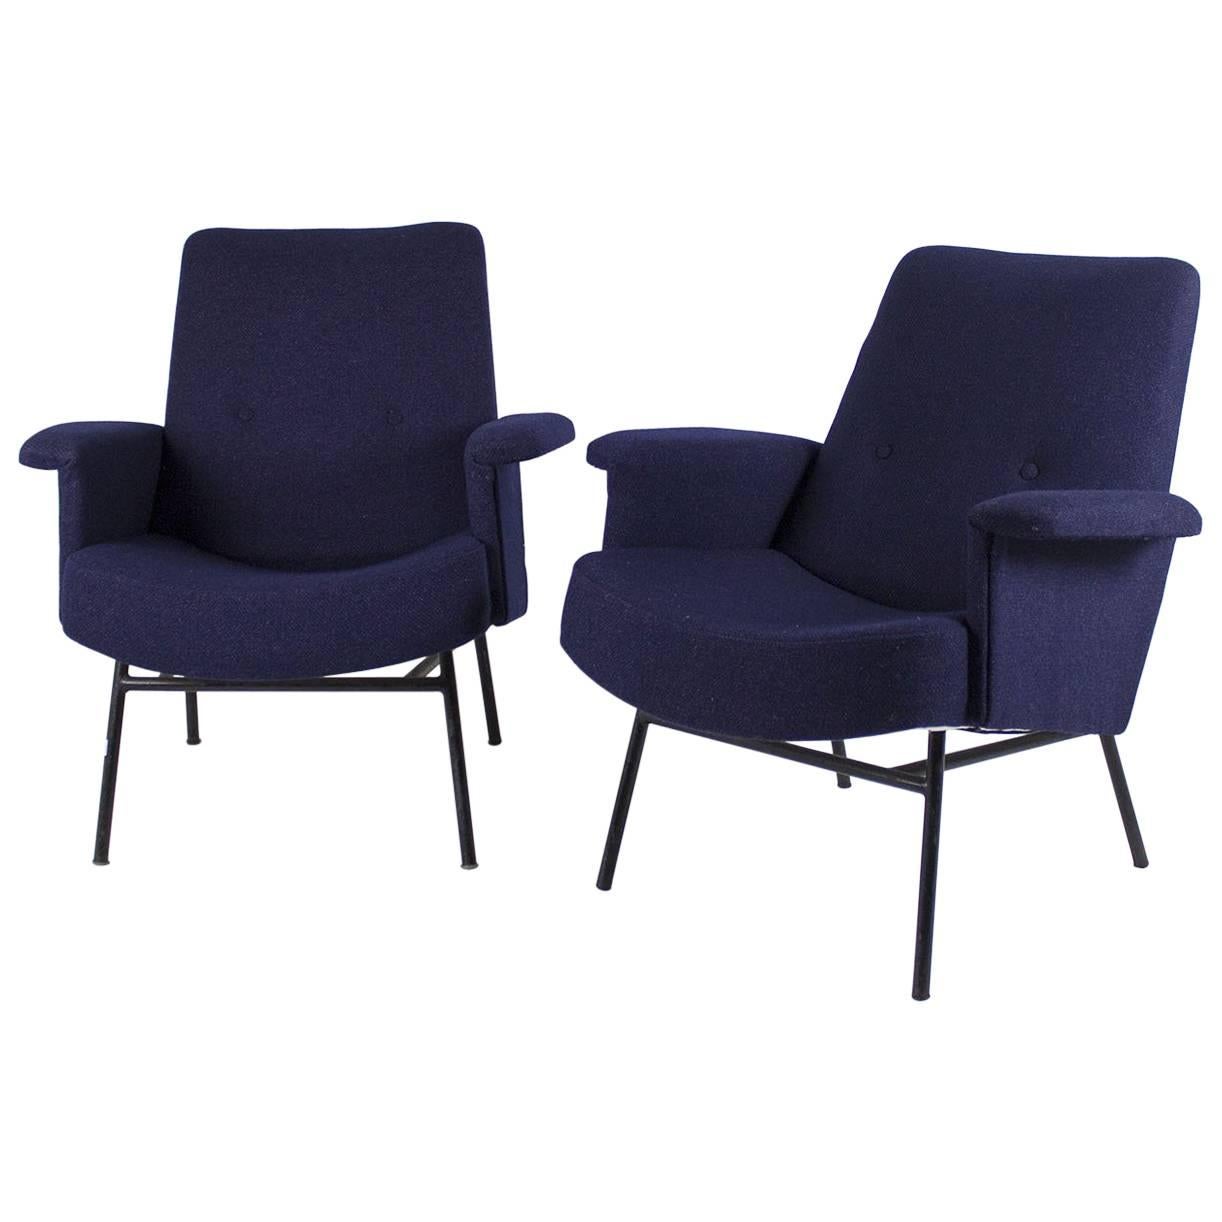 Pair of Armchairs SK660 by Pierre Guariche for Steiner, 1950 For Sale